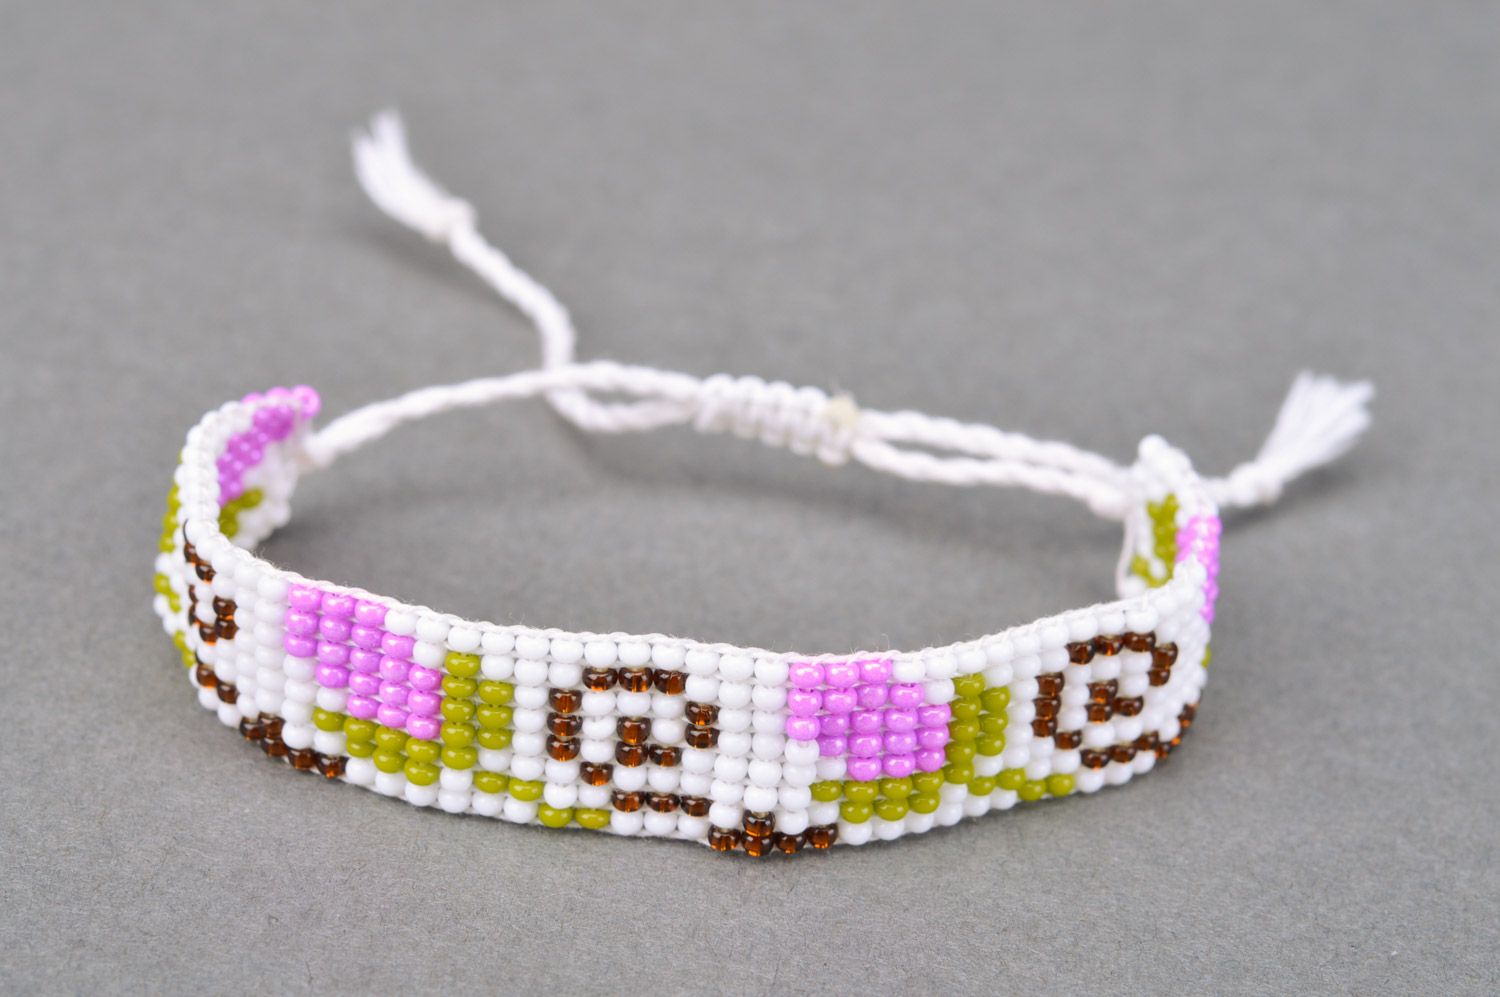 Stylish handmade women's wrist bracelet woven of beads and threads of light color with flower pattern photo 2